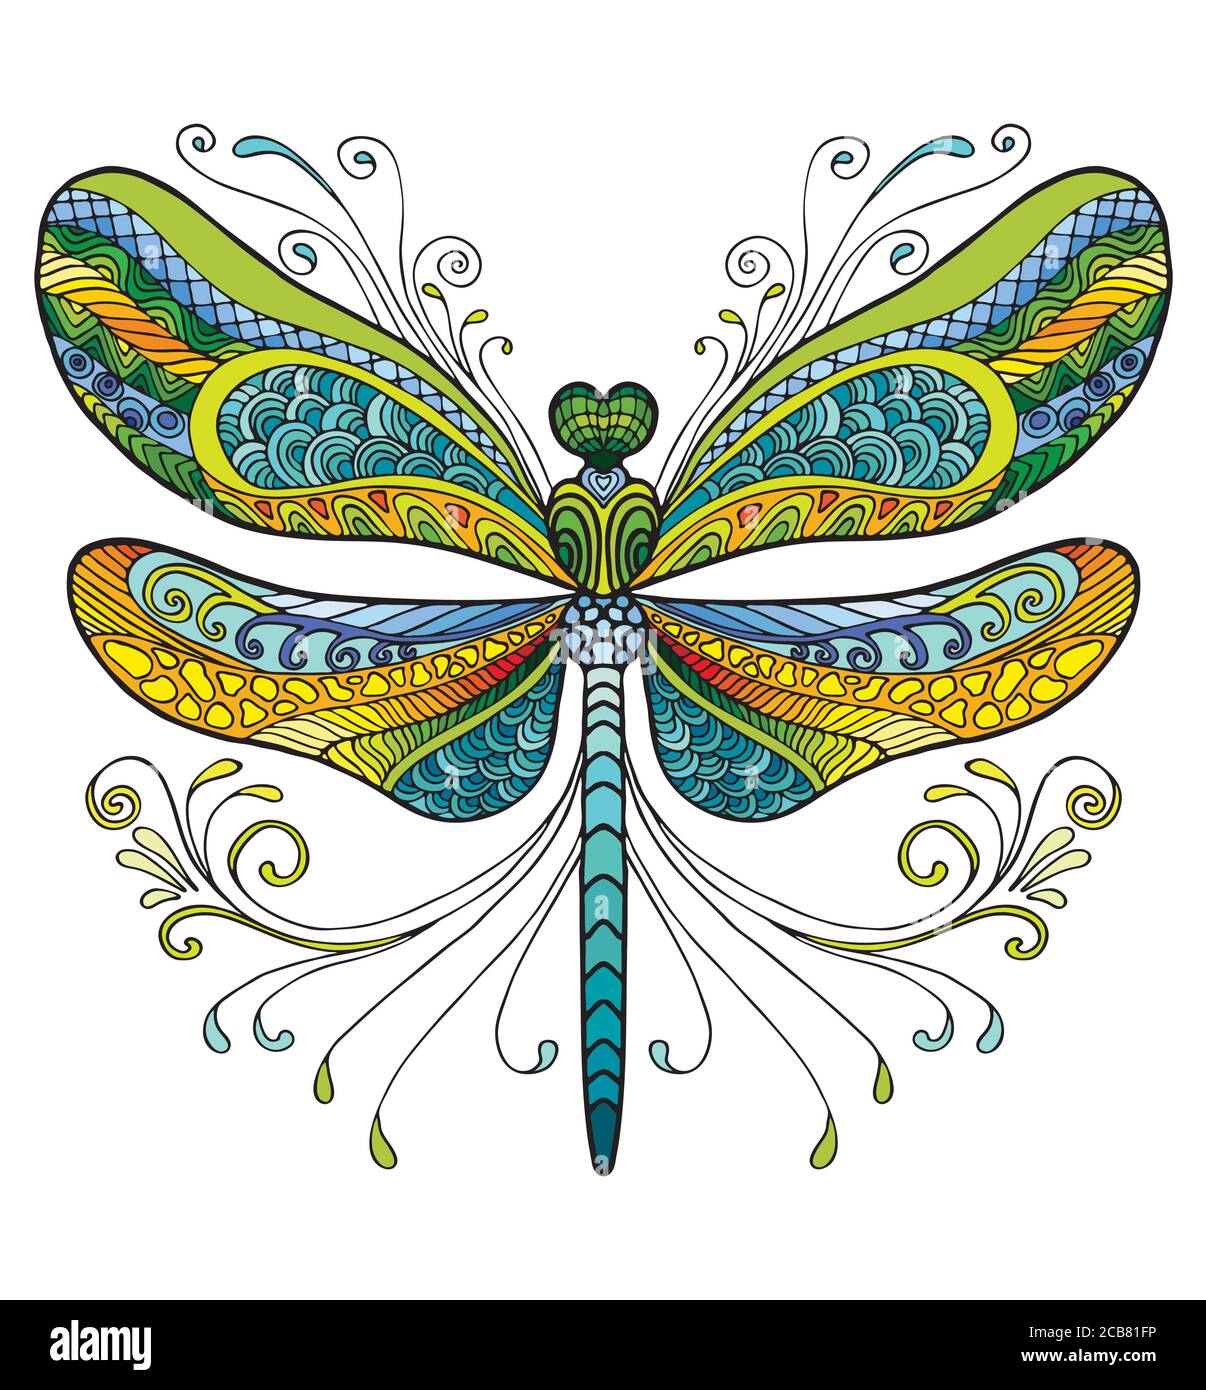 Colorful ornamental fantasy dragonfly. Vector decorative abstract vector illustration isolated on white background. Stock illustration for adult color Stock Vector